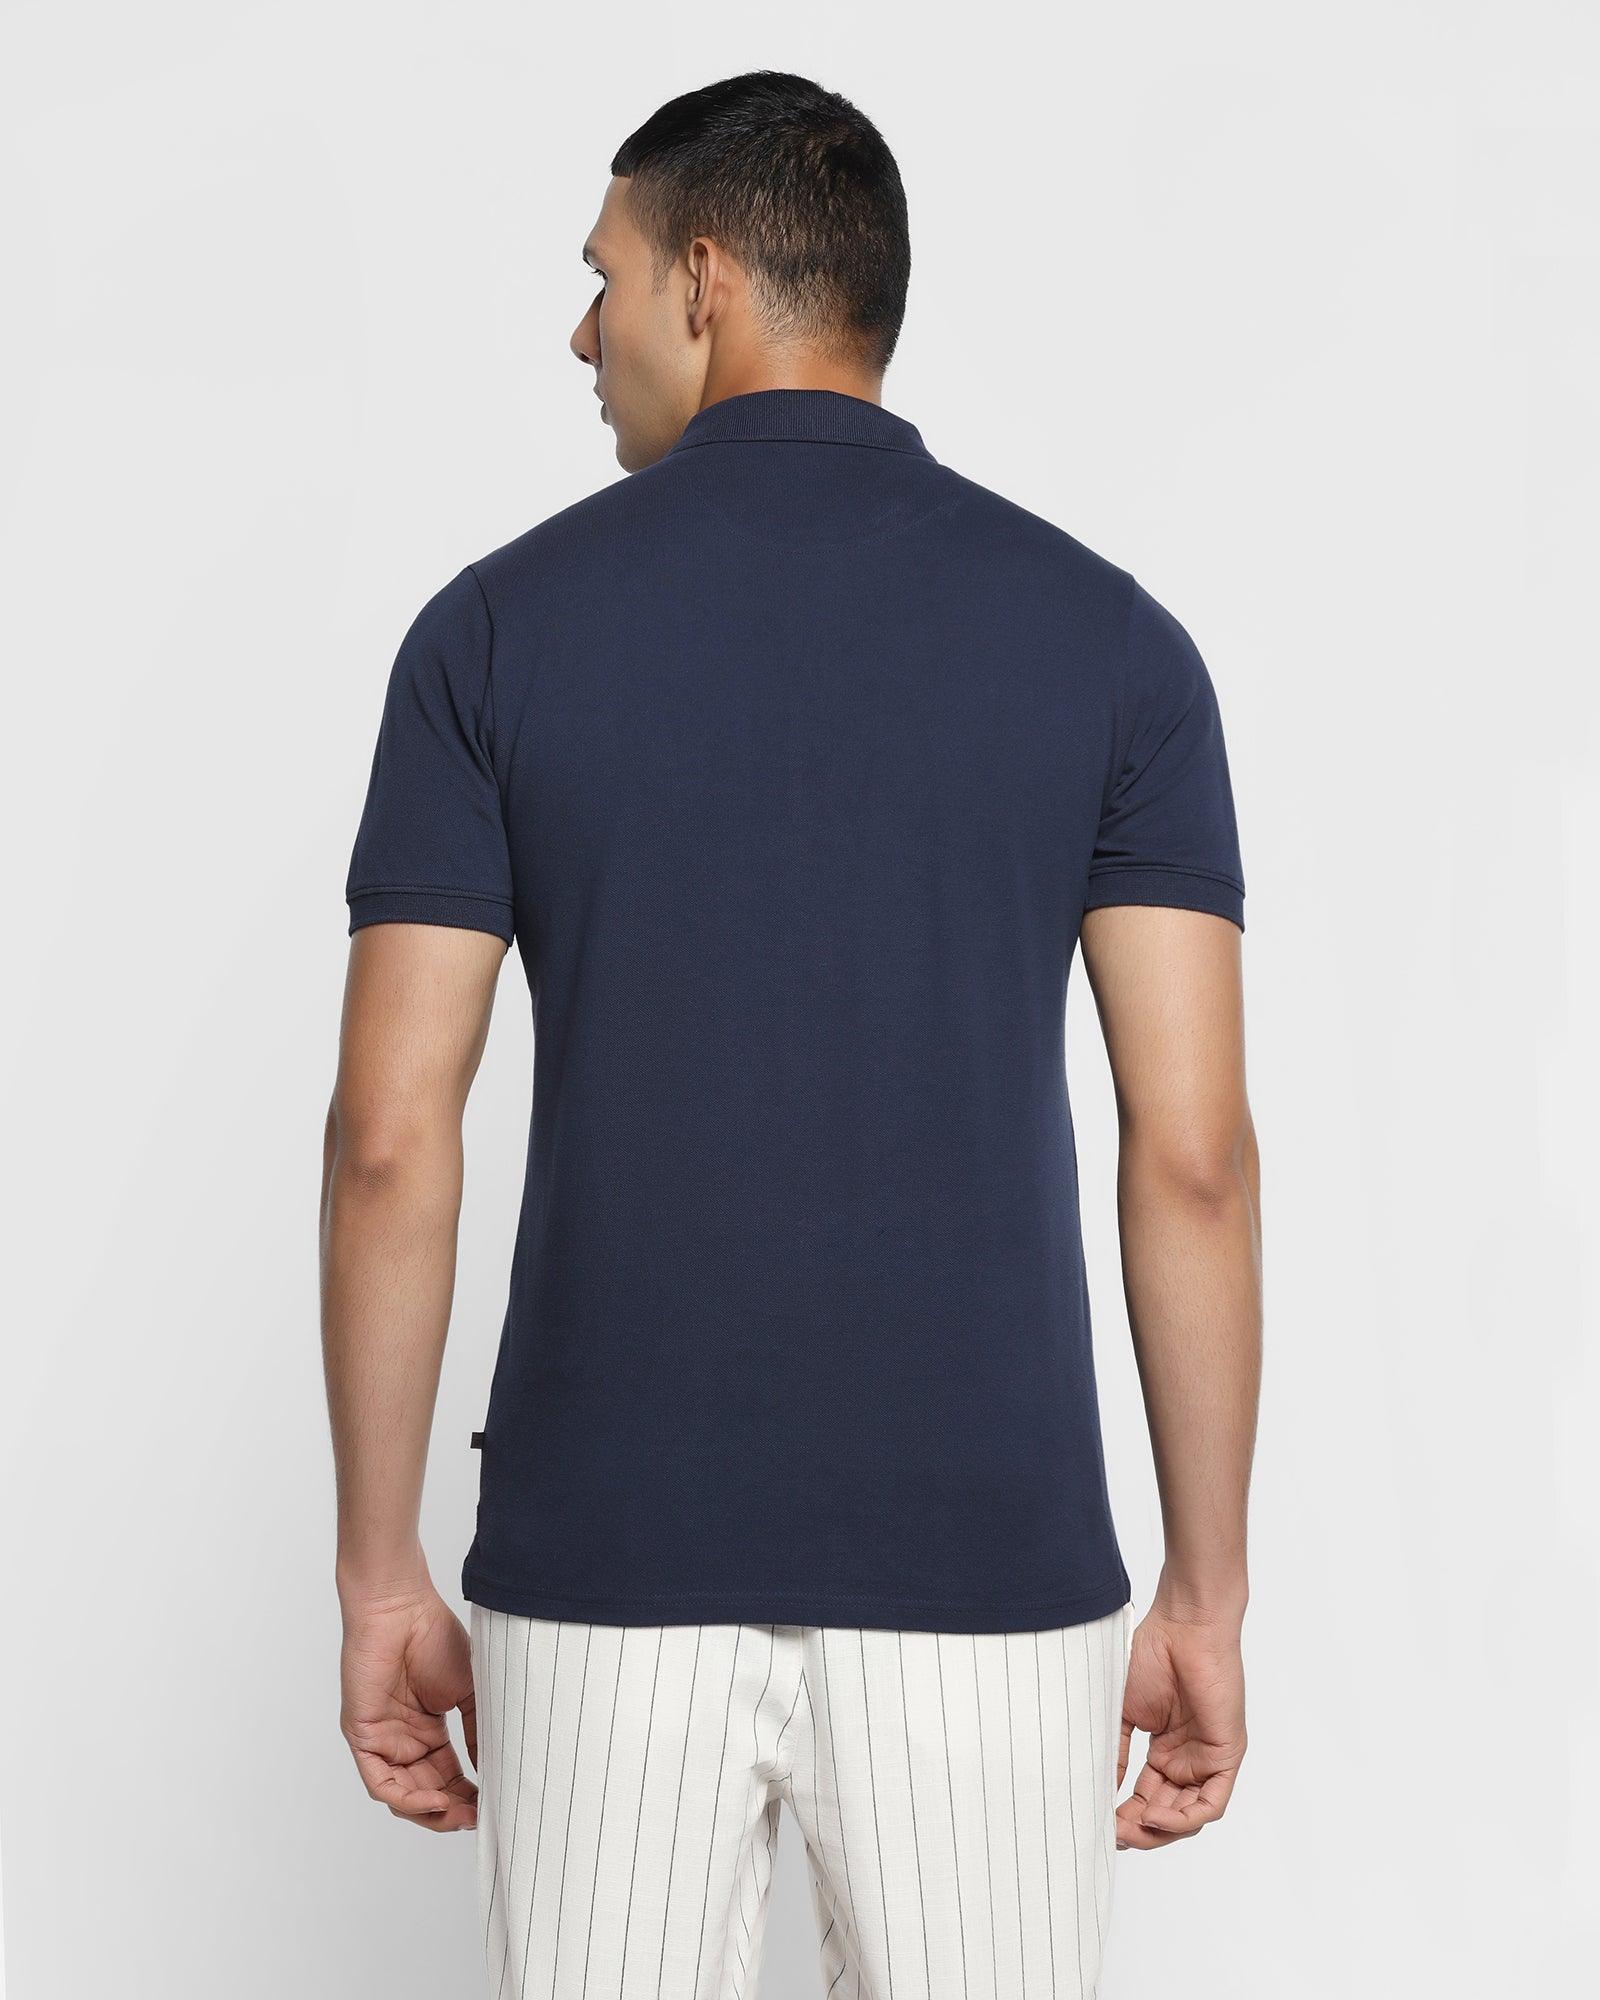 Polo Navy Solid T Shirt - Miles